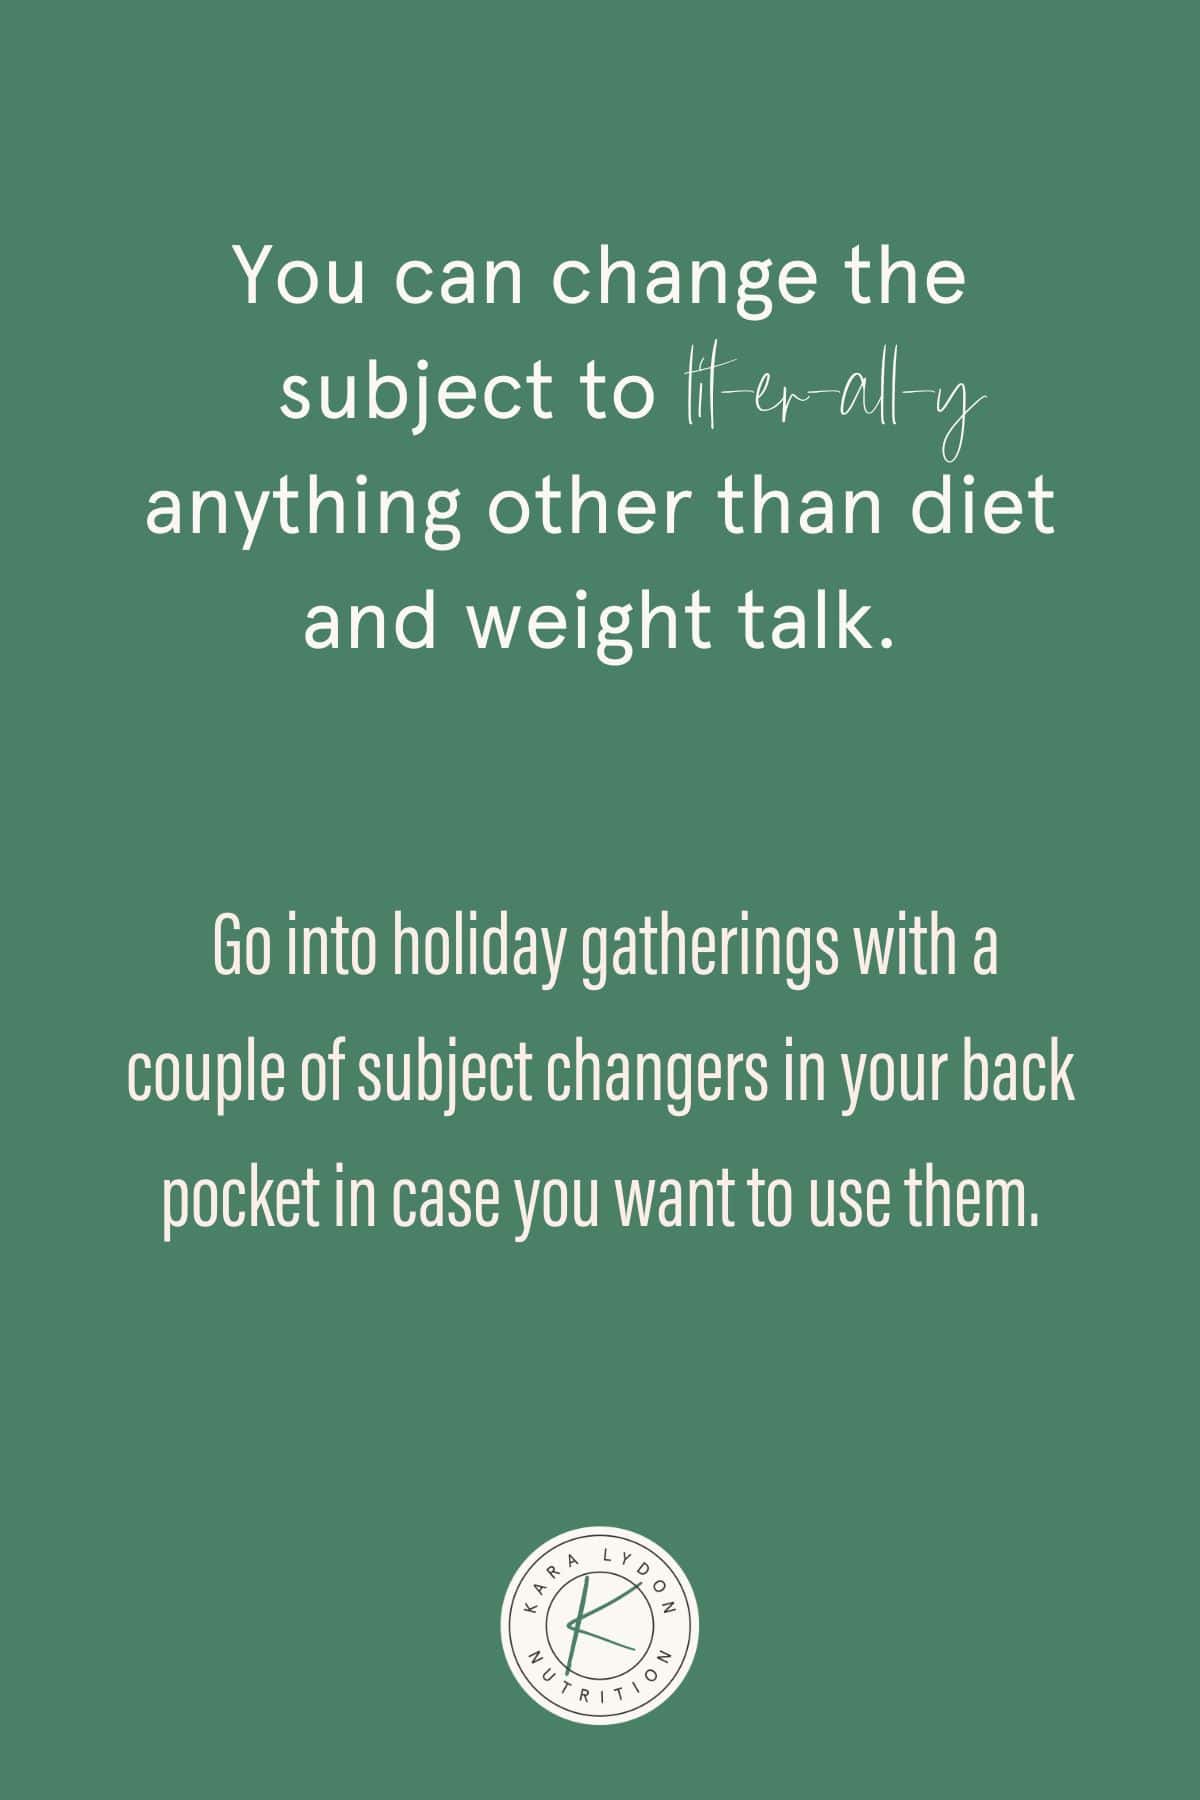 Graphic with quote: "You can change the subject to lit-er-all-y anything but diet and weight talk.  Go to holiday gatherings with a few theme changers in your back pocket in case you want to use them."